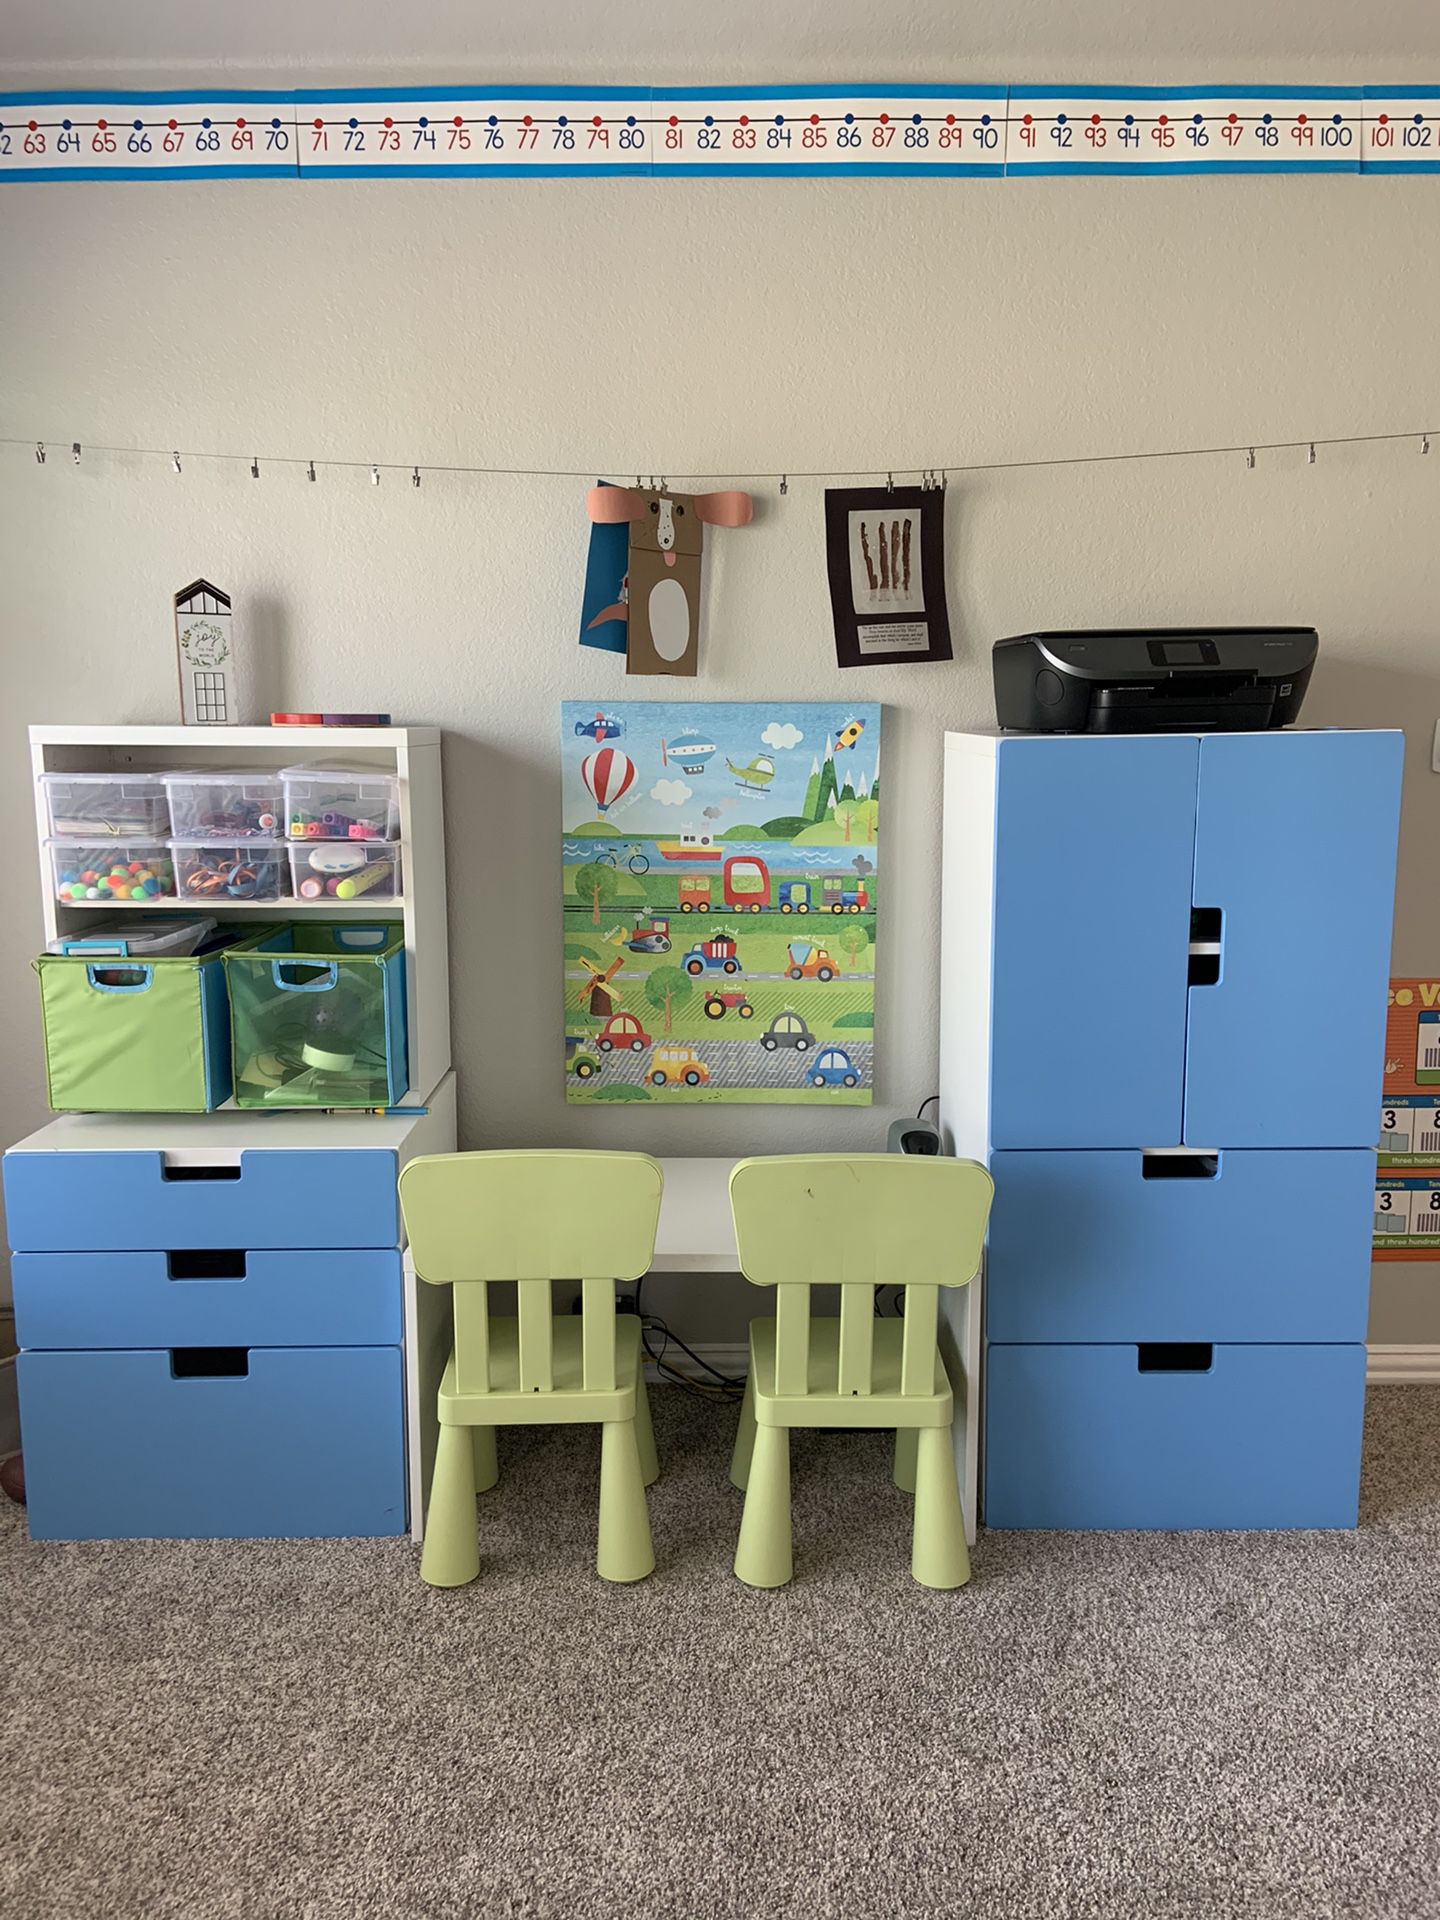 Home school classroom furniture and items